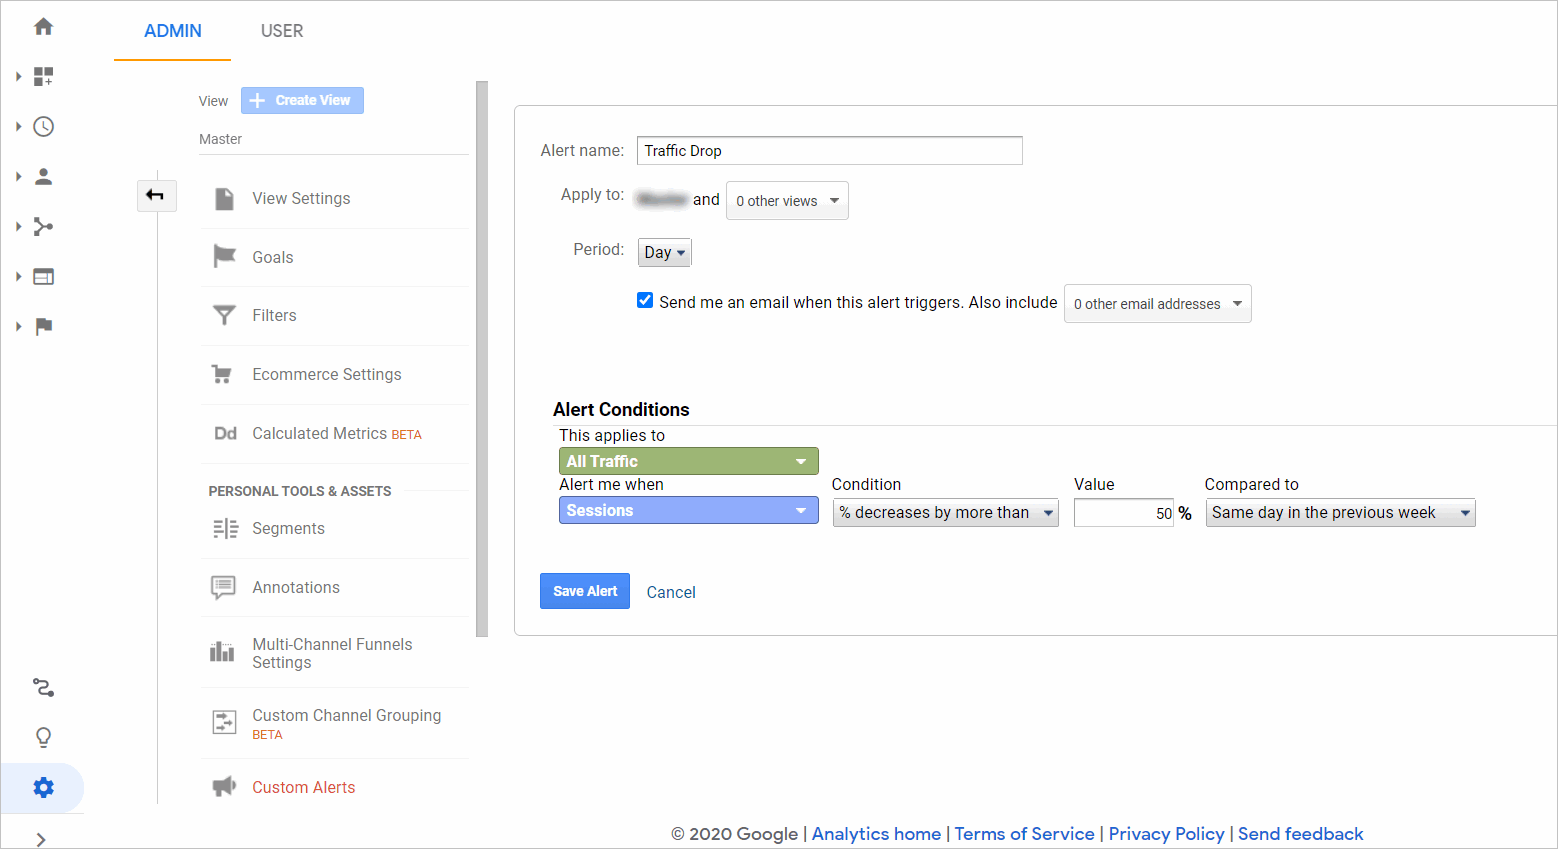 creating a custom alert screen on google analytics. the example is for a traffic drop which will prompt google analytics to send an alert if sessions decrease by more than 50% compared to the same day the previous week